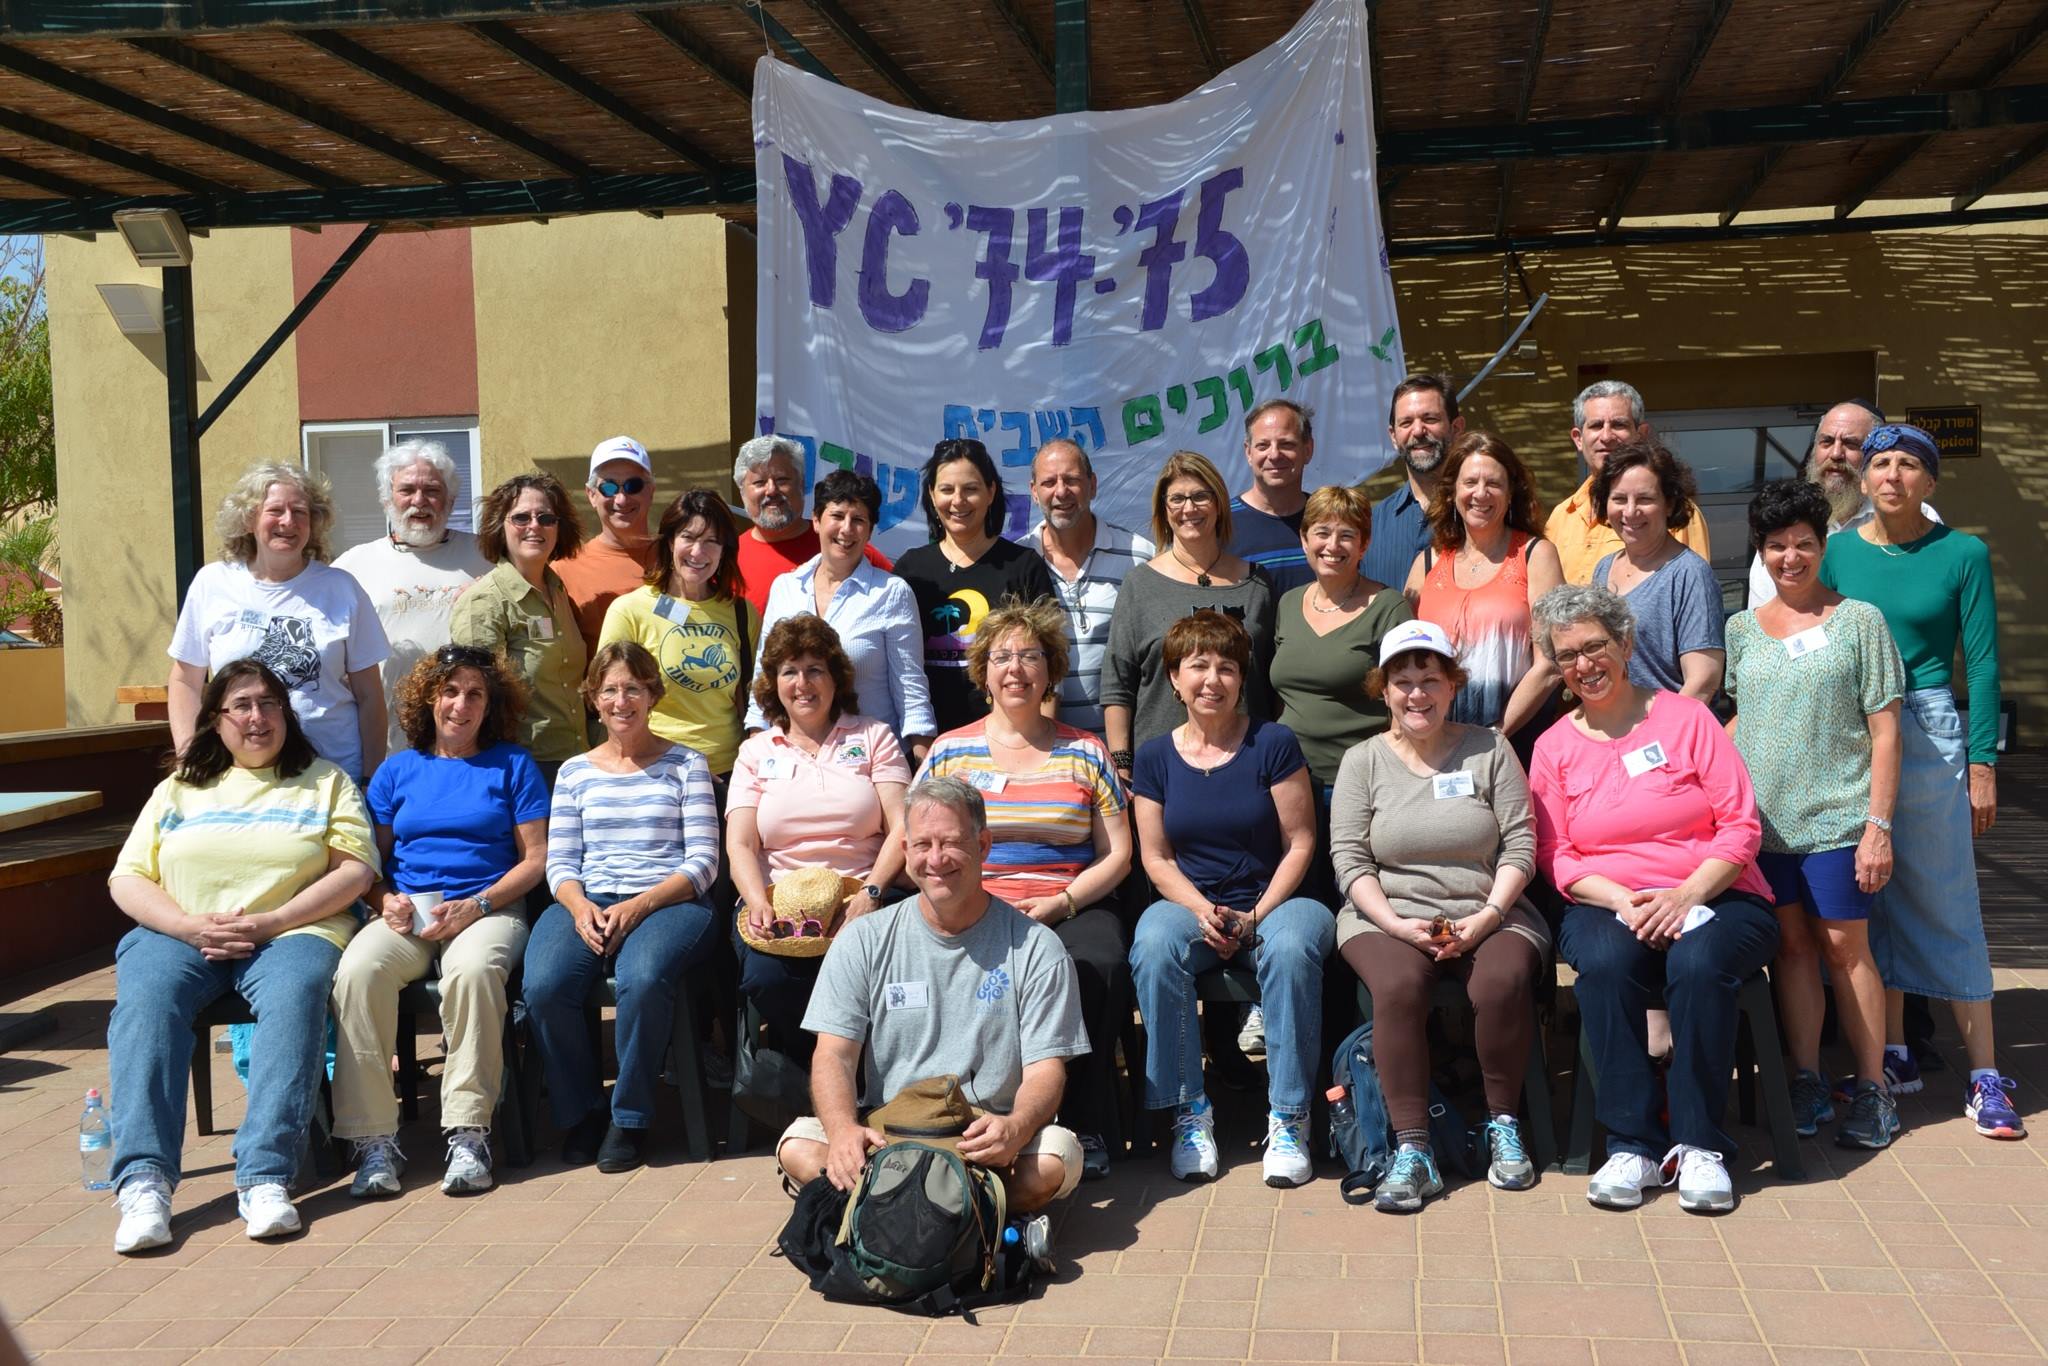 Gershon Baskin (4th from left, top row) at the 40th anniversary reunion of the 11974-1975 Young Judea Year Course. April 6, 2014